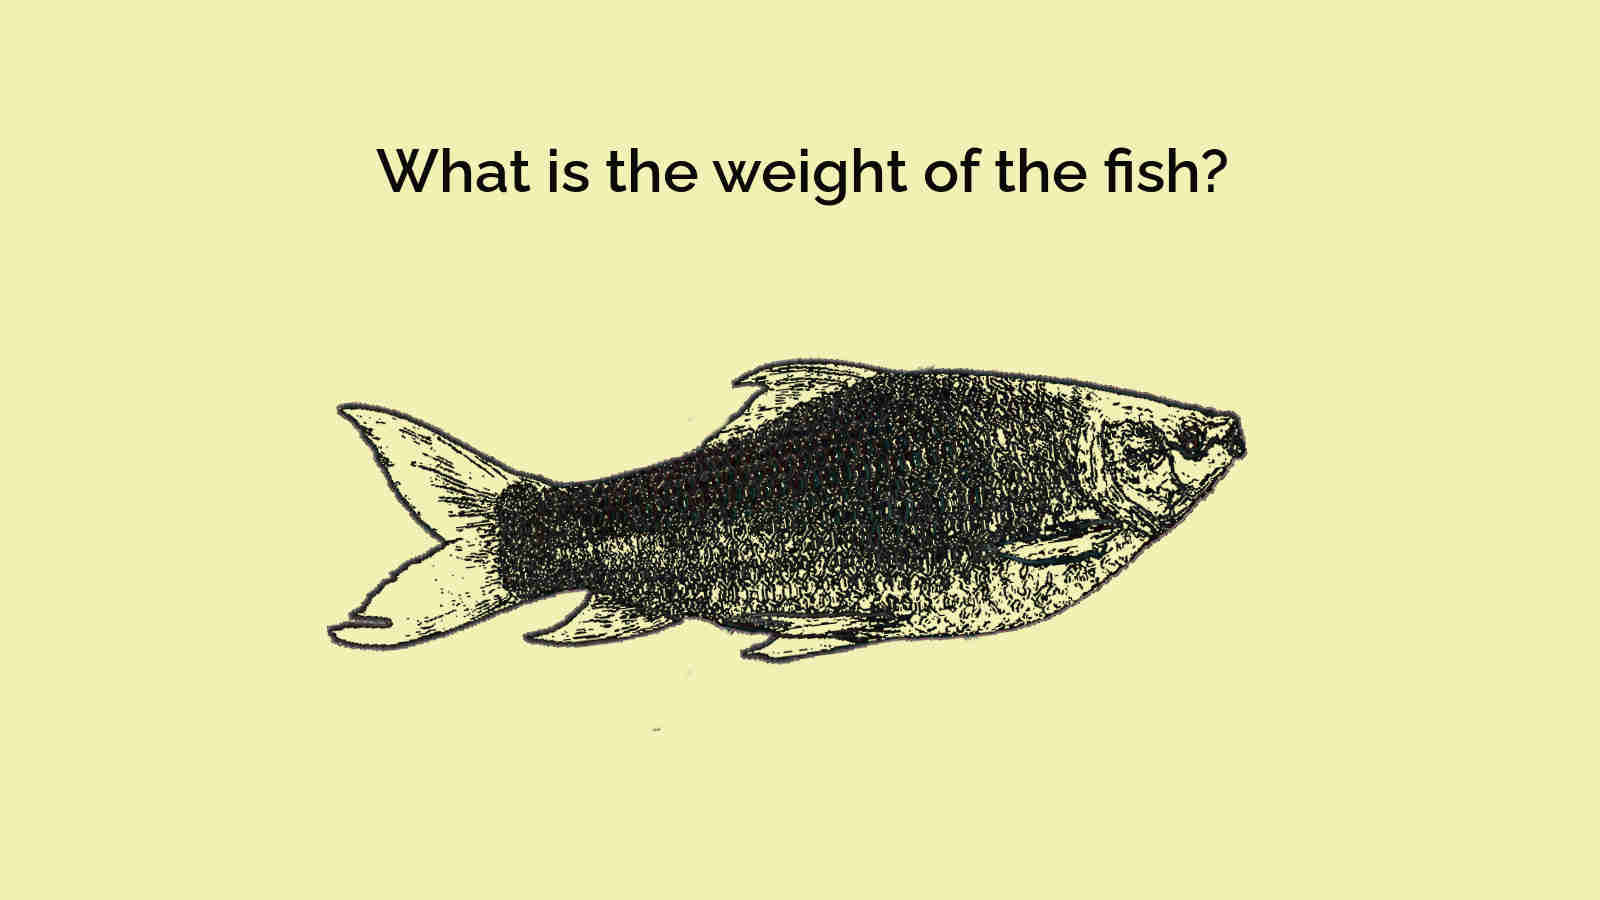 What is the weight of the fish?